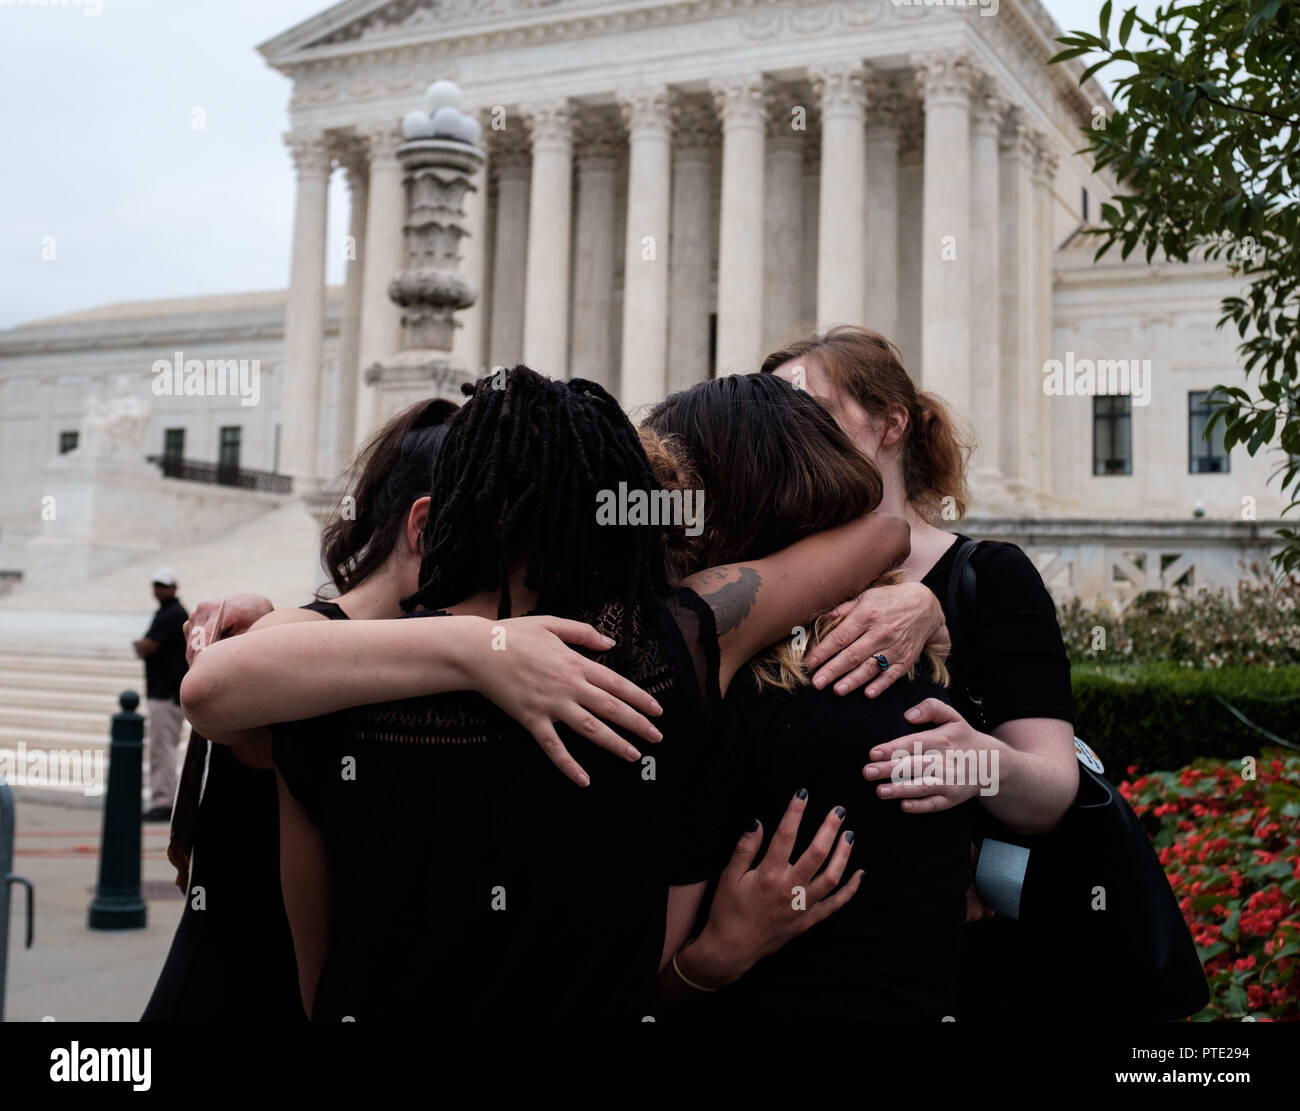 Washington, D.C, USA. 9th Oct, 2018. A group of survivors hug outside of the U.S Supreme Court shortly after Judge KAVANAUGH'S confirmation was announced on October 6, 2018. Credit: Michael A. McCoy/ZUMA Wire/Alamy Live News Stock Photo